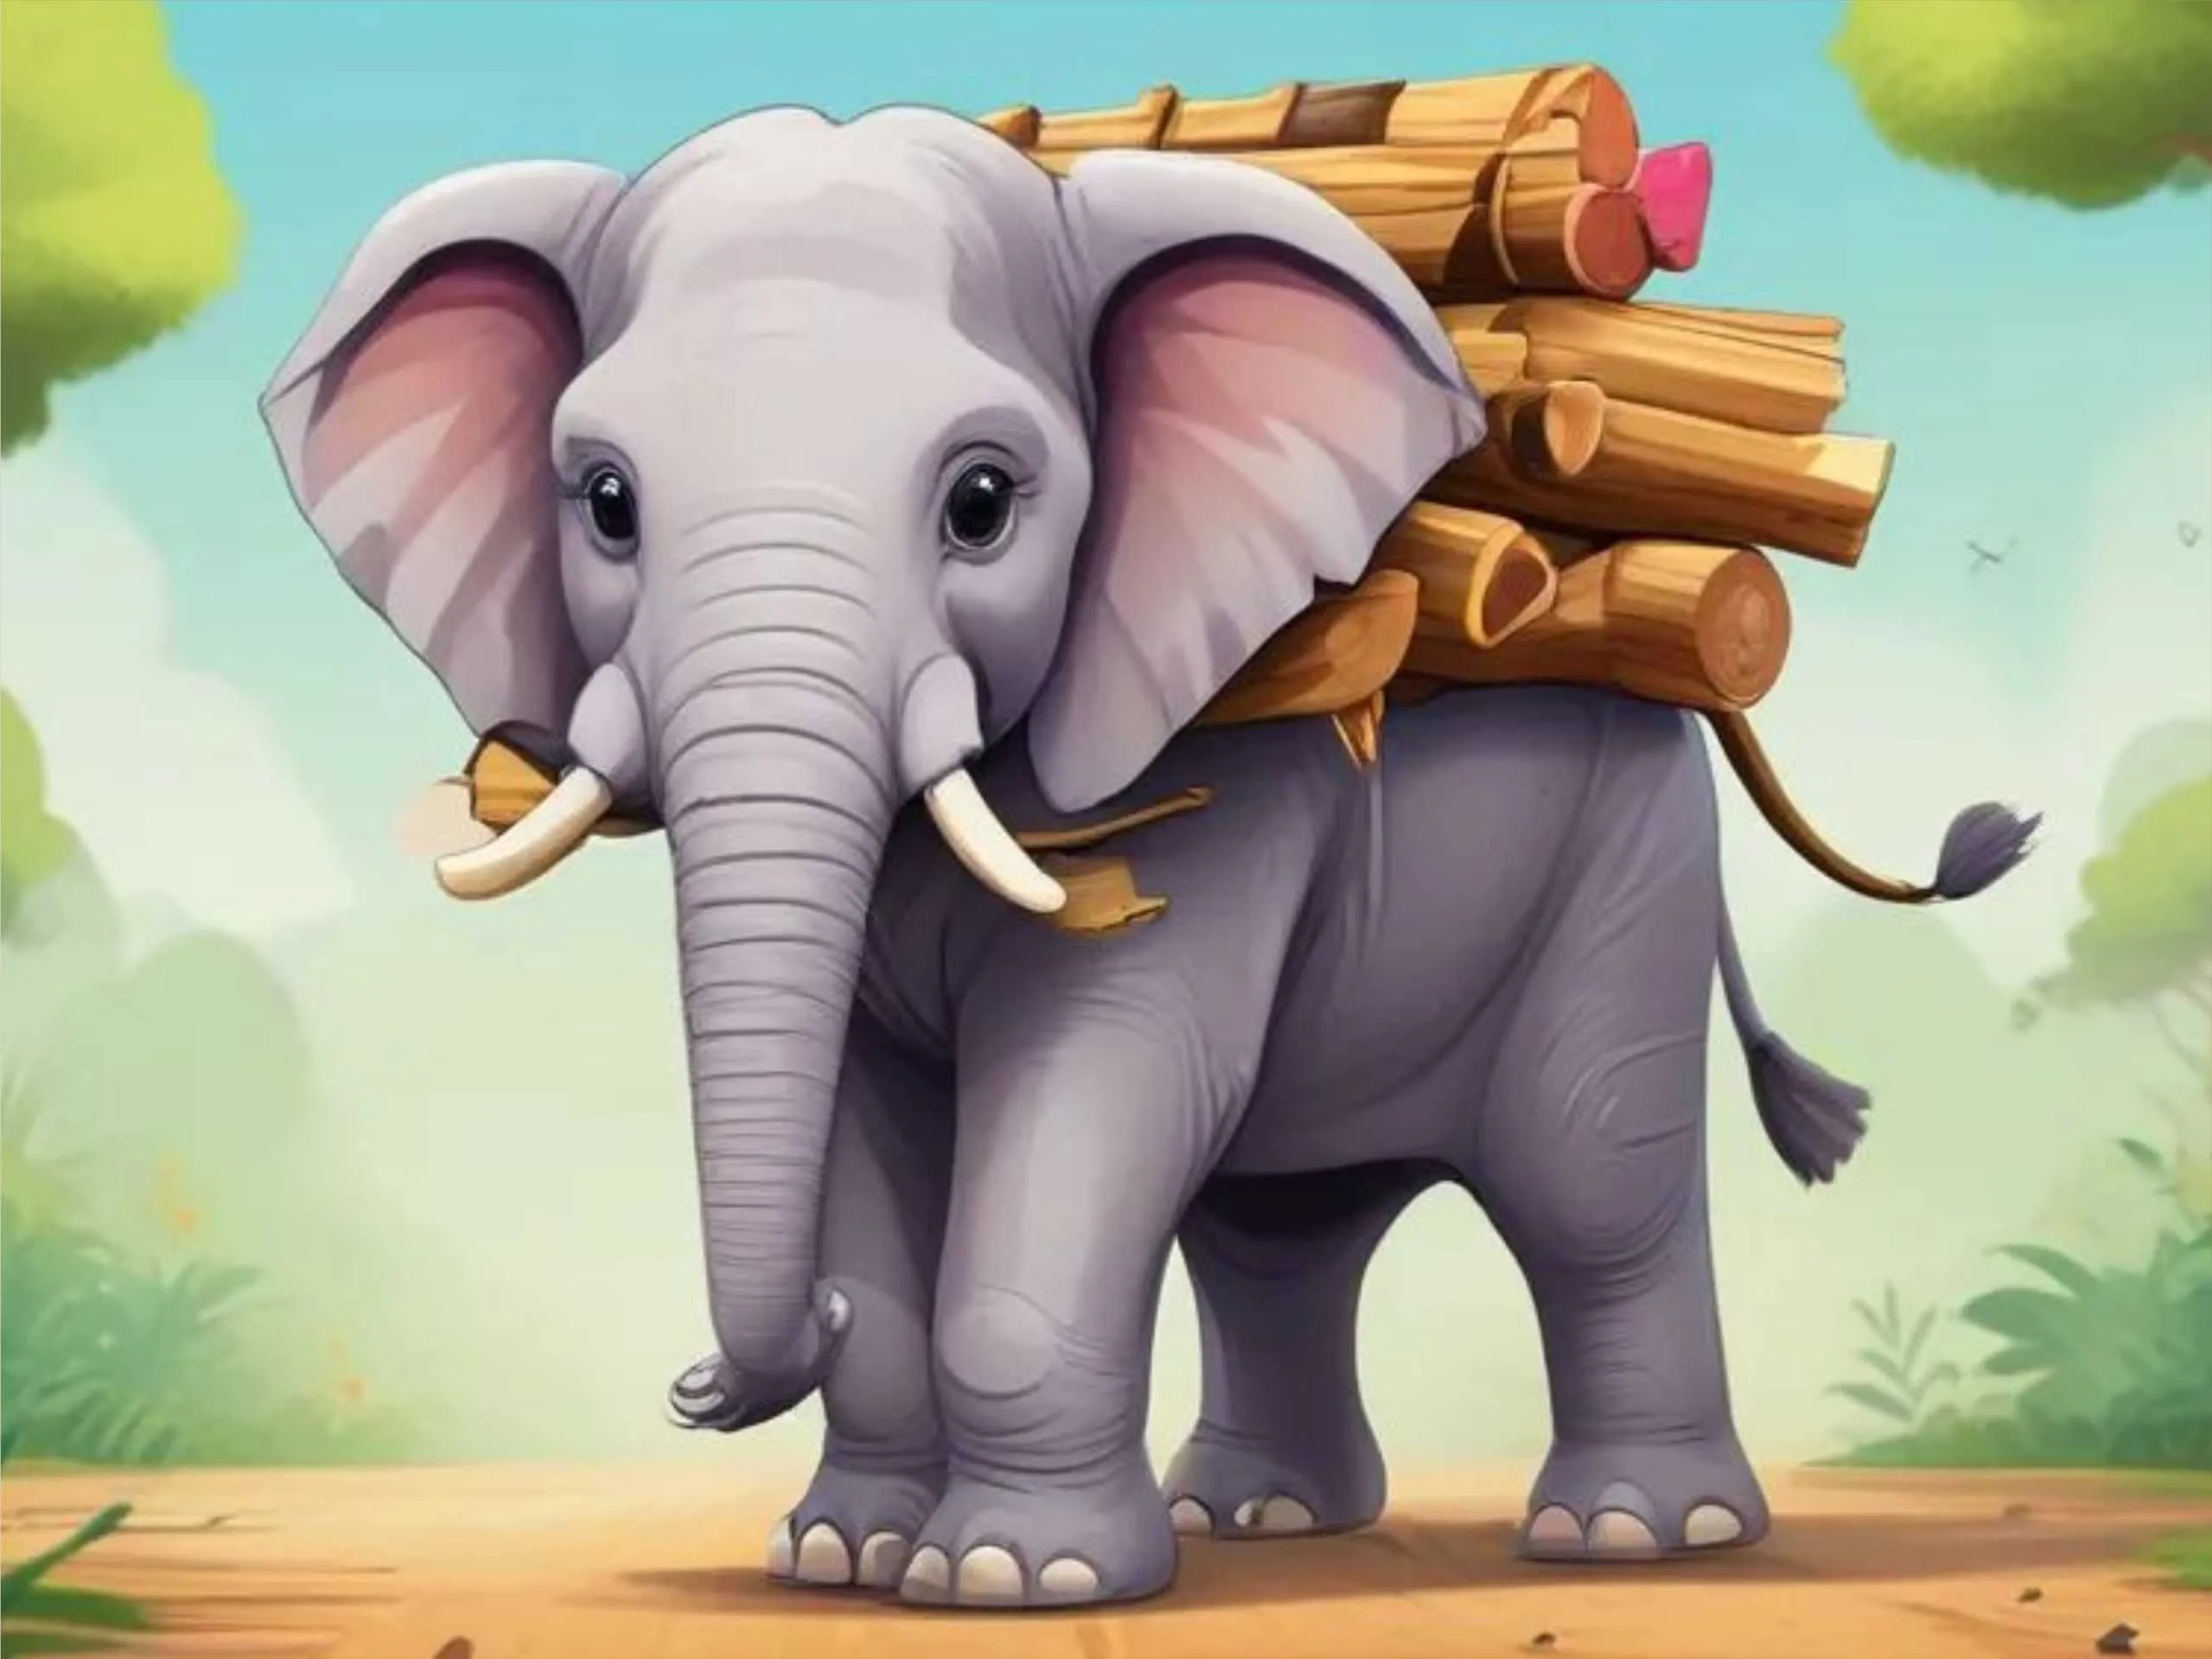 Cartoon image of an elephant carrying wooden logs